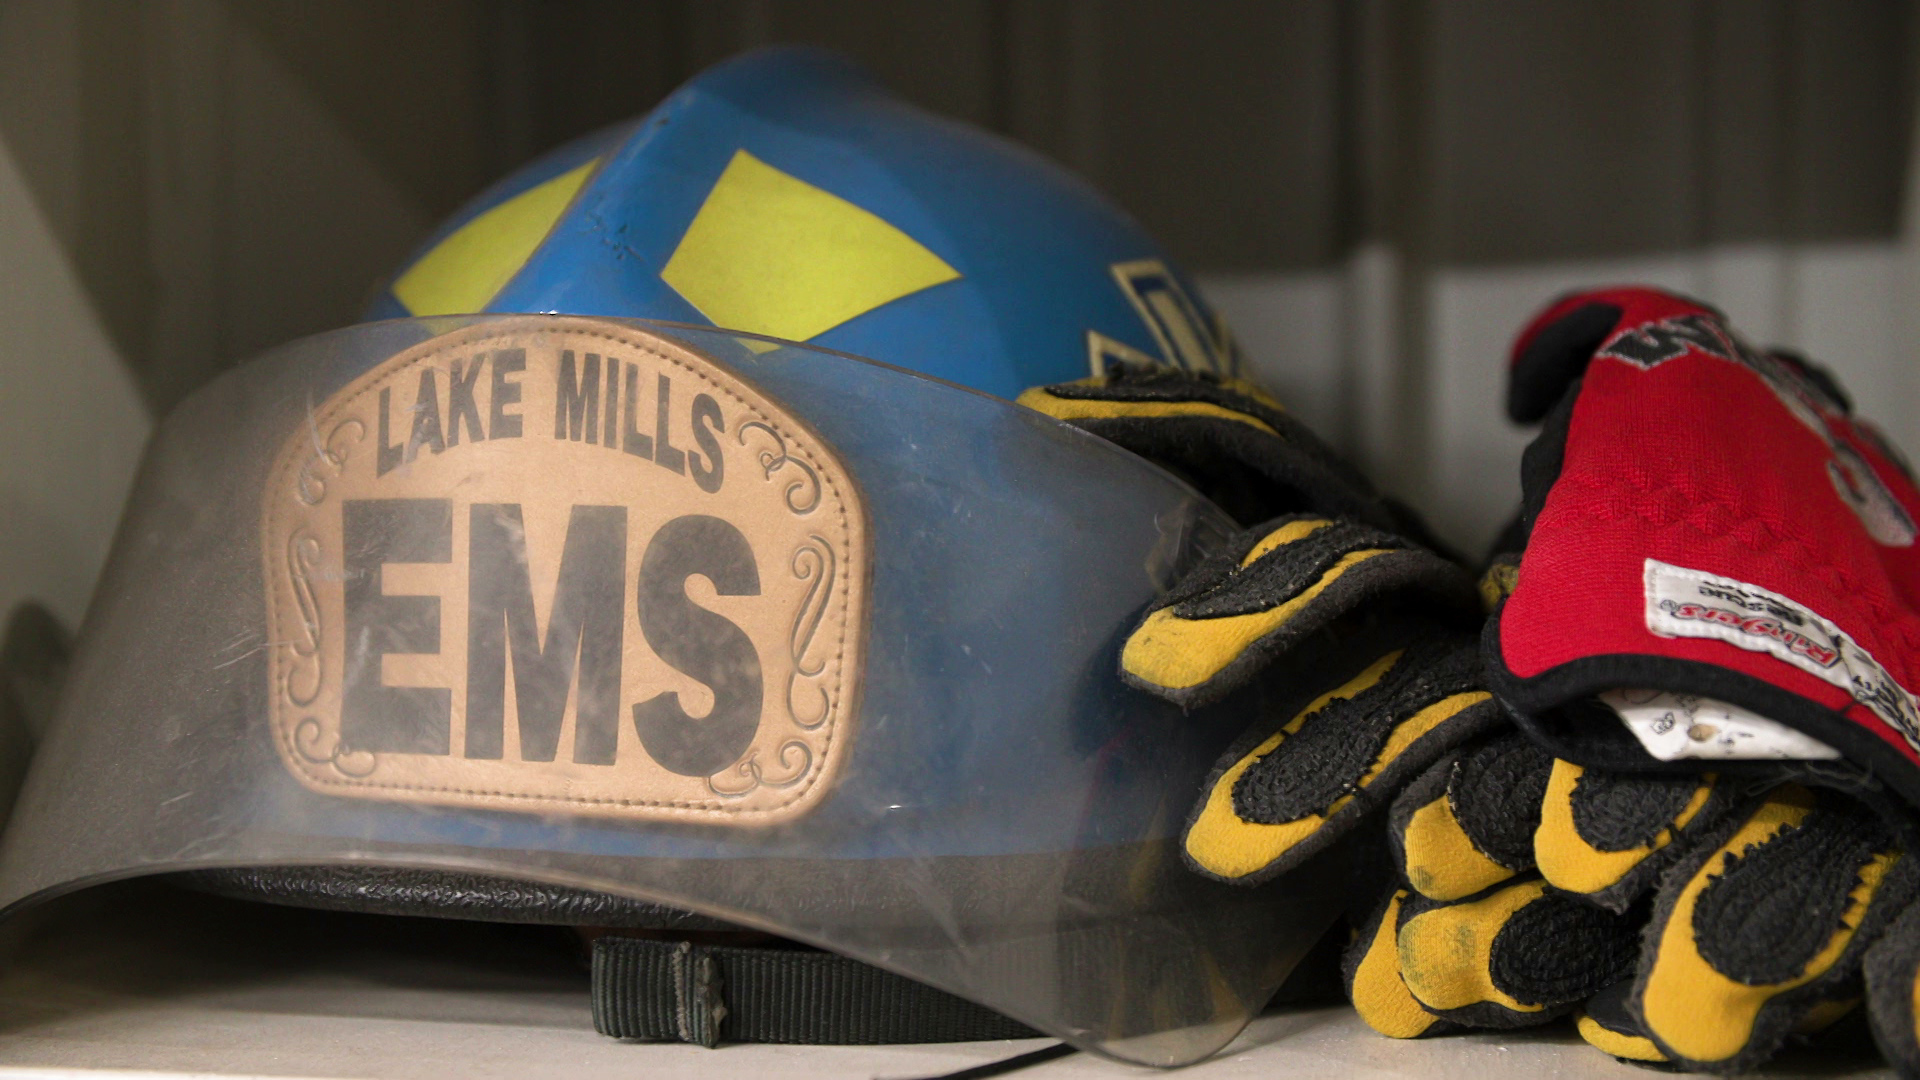 A fire helmet with "Lake Mills EMS" printed in large text on its front sits on a shelf alongside with a pair of padded safety gloves